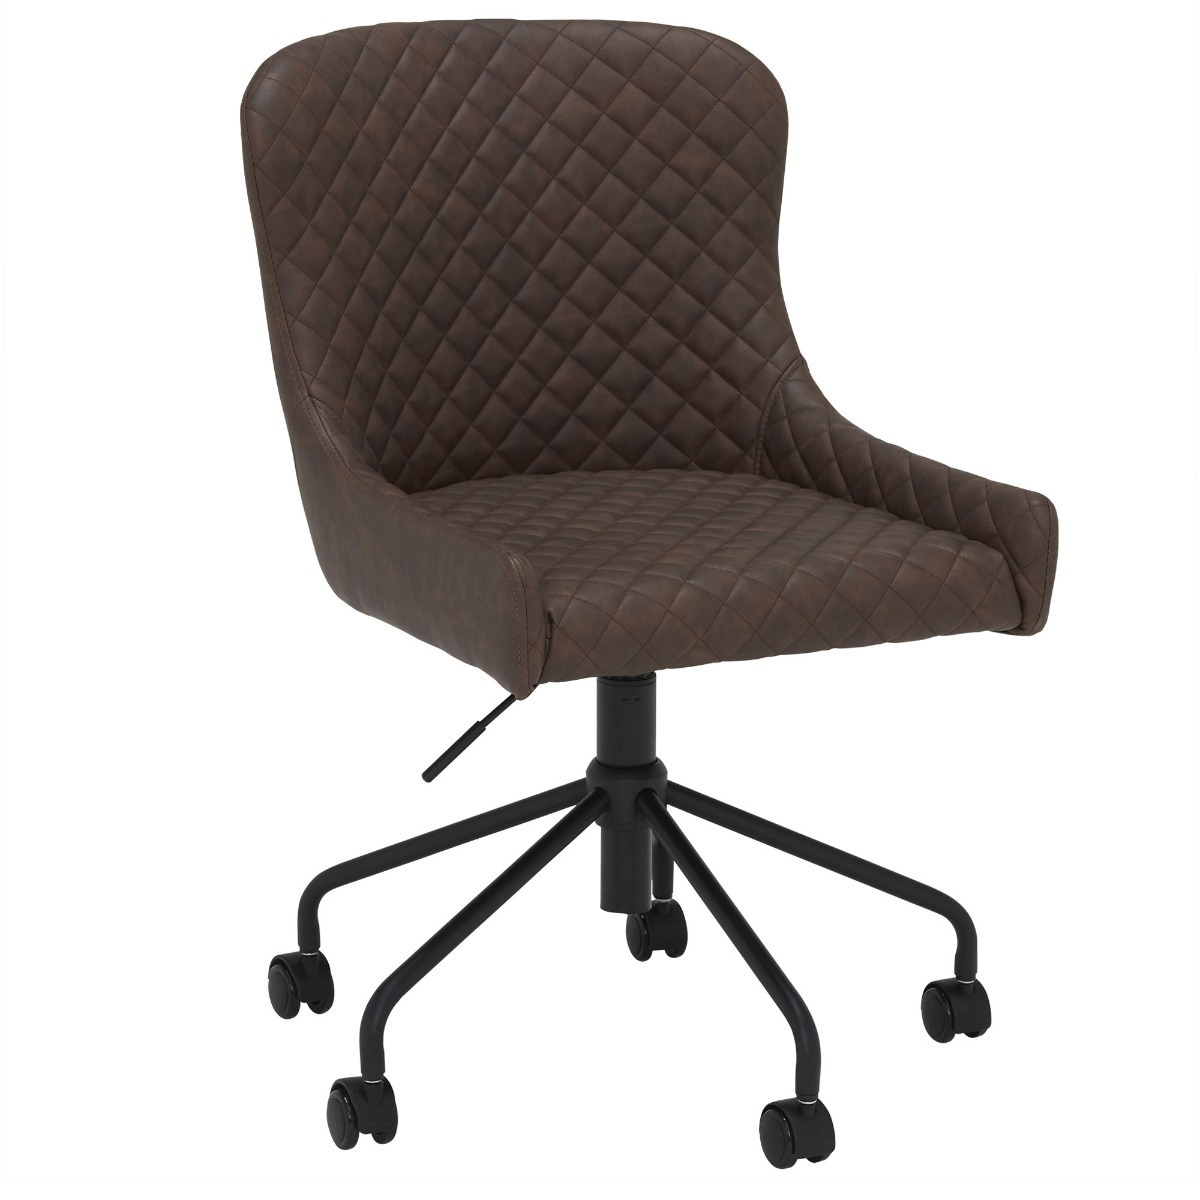 Rivington Occasional Work Office Chair, Brown - Barker & Stonehouse